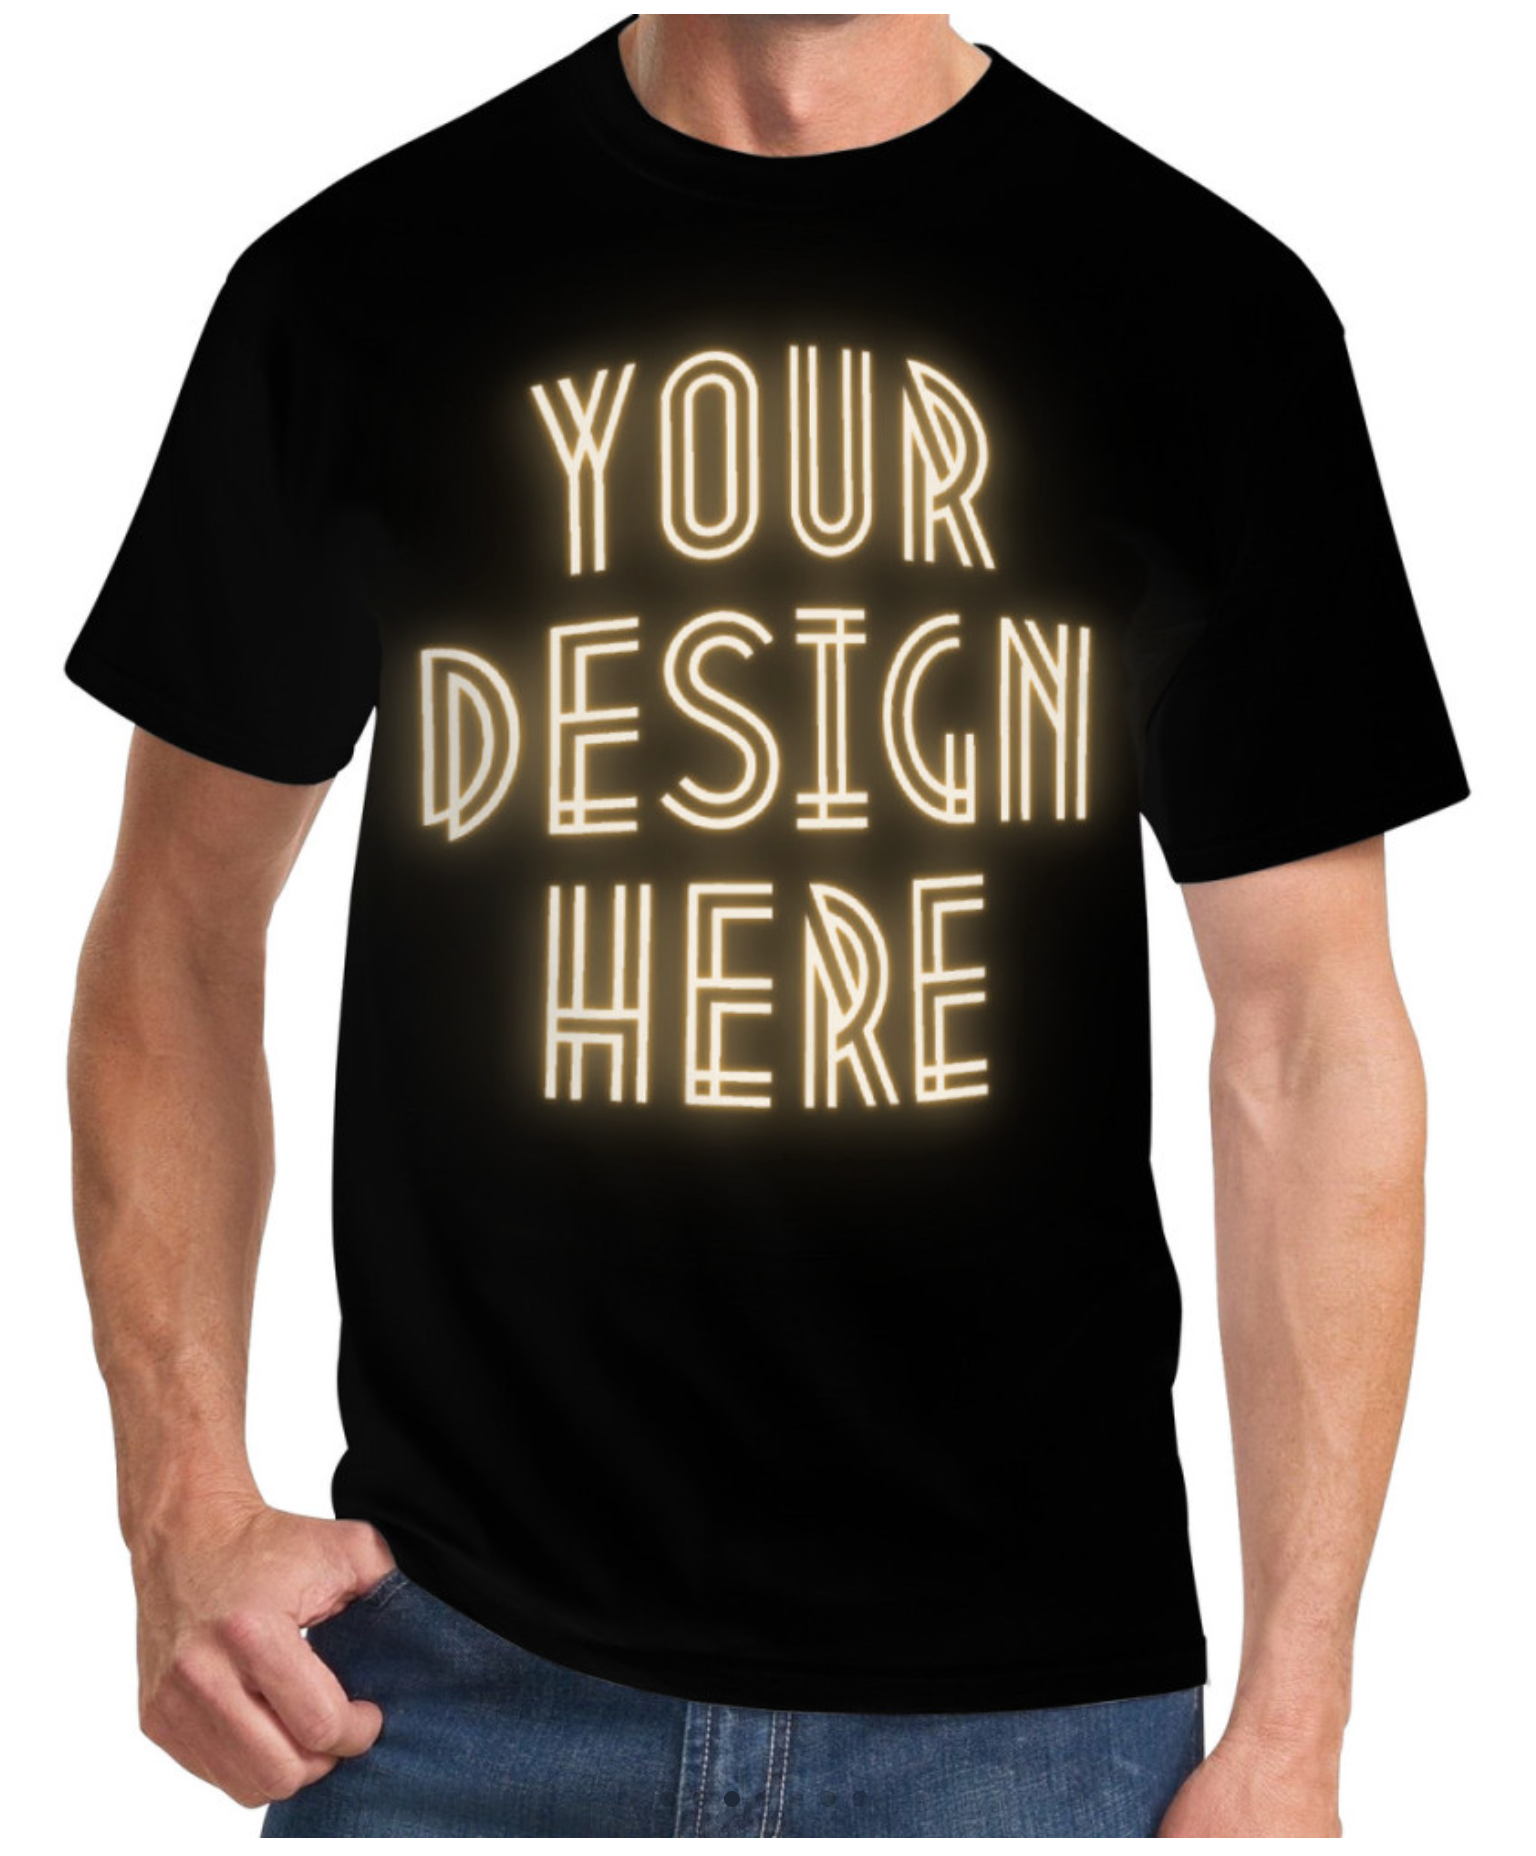 Blank T shirt Customized with Design for Print on Demand service